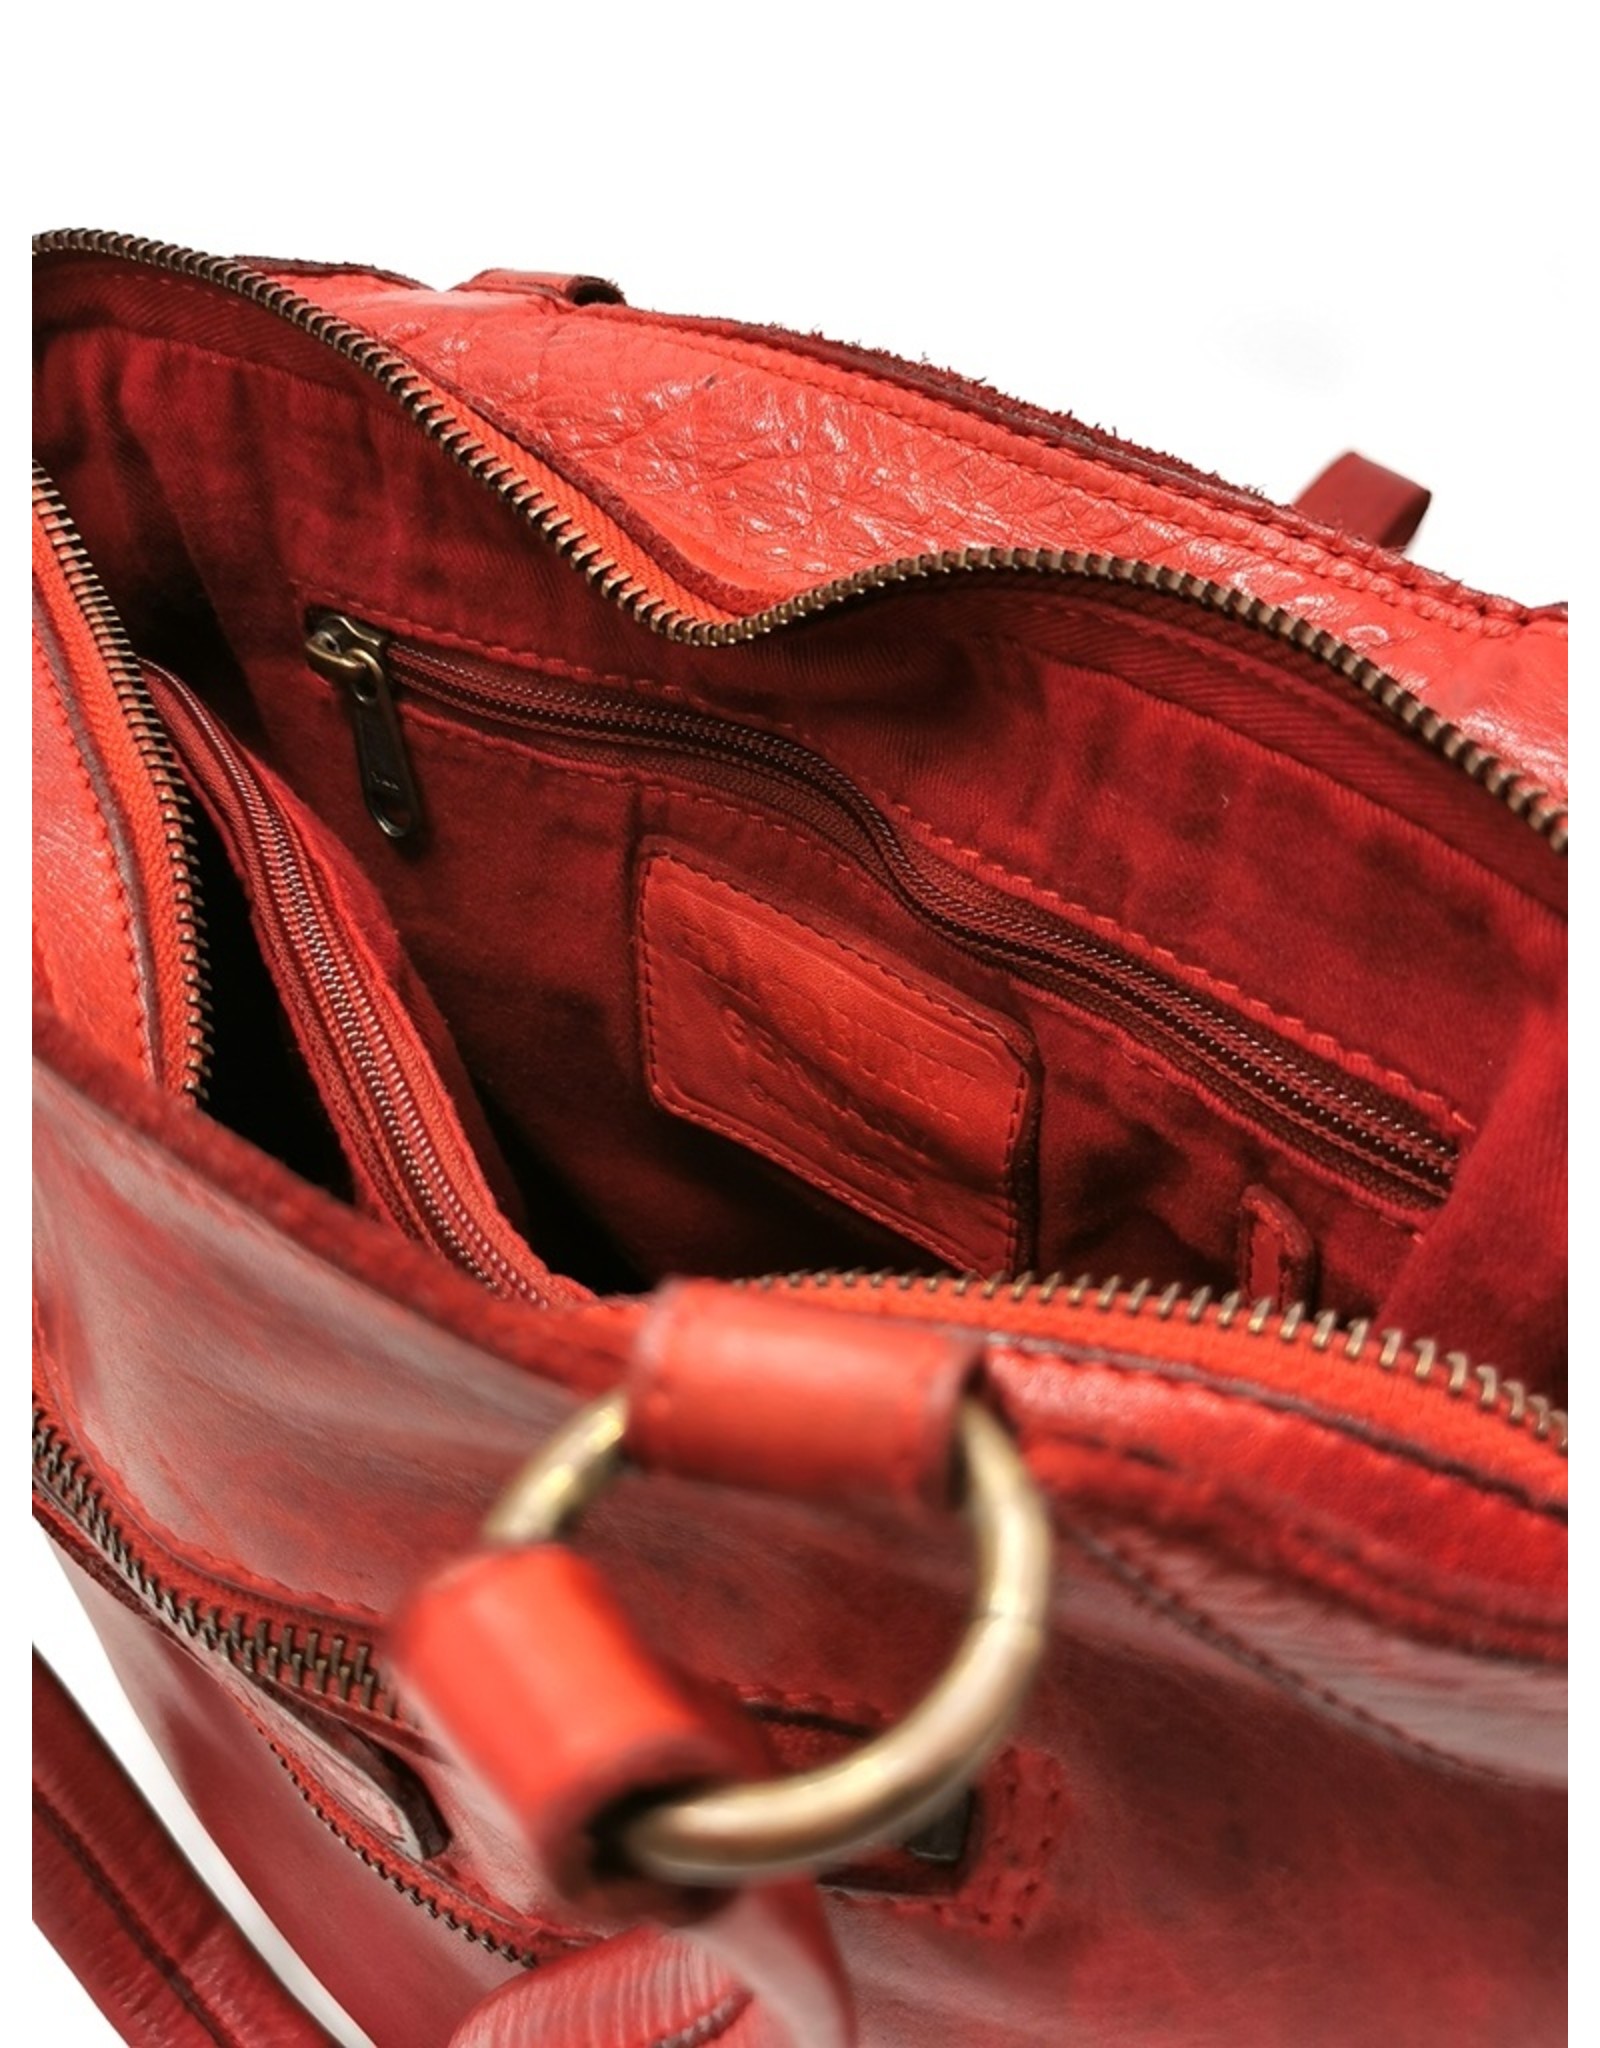 HillBurry Leather bags - Hillburry Leather Shopper with long double handles red